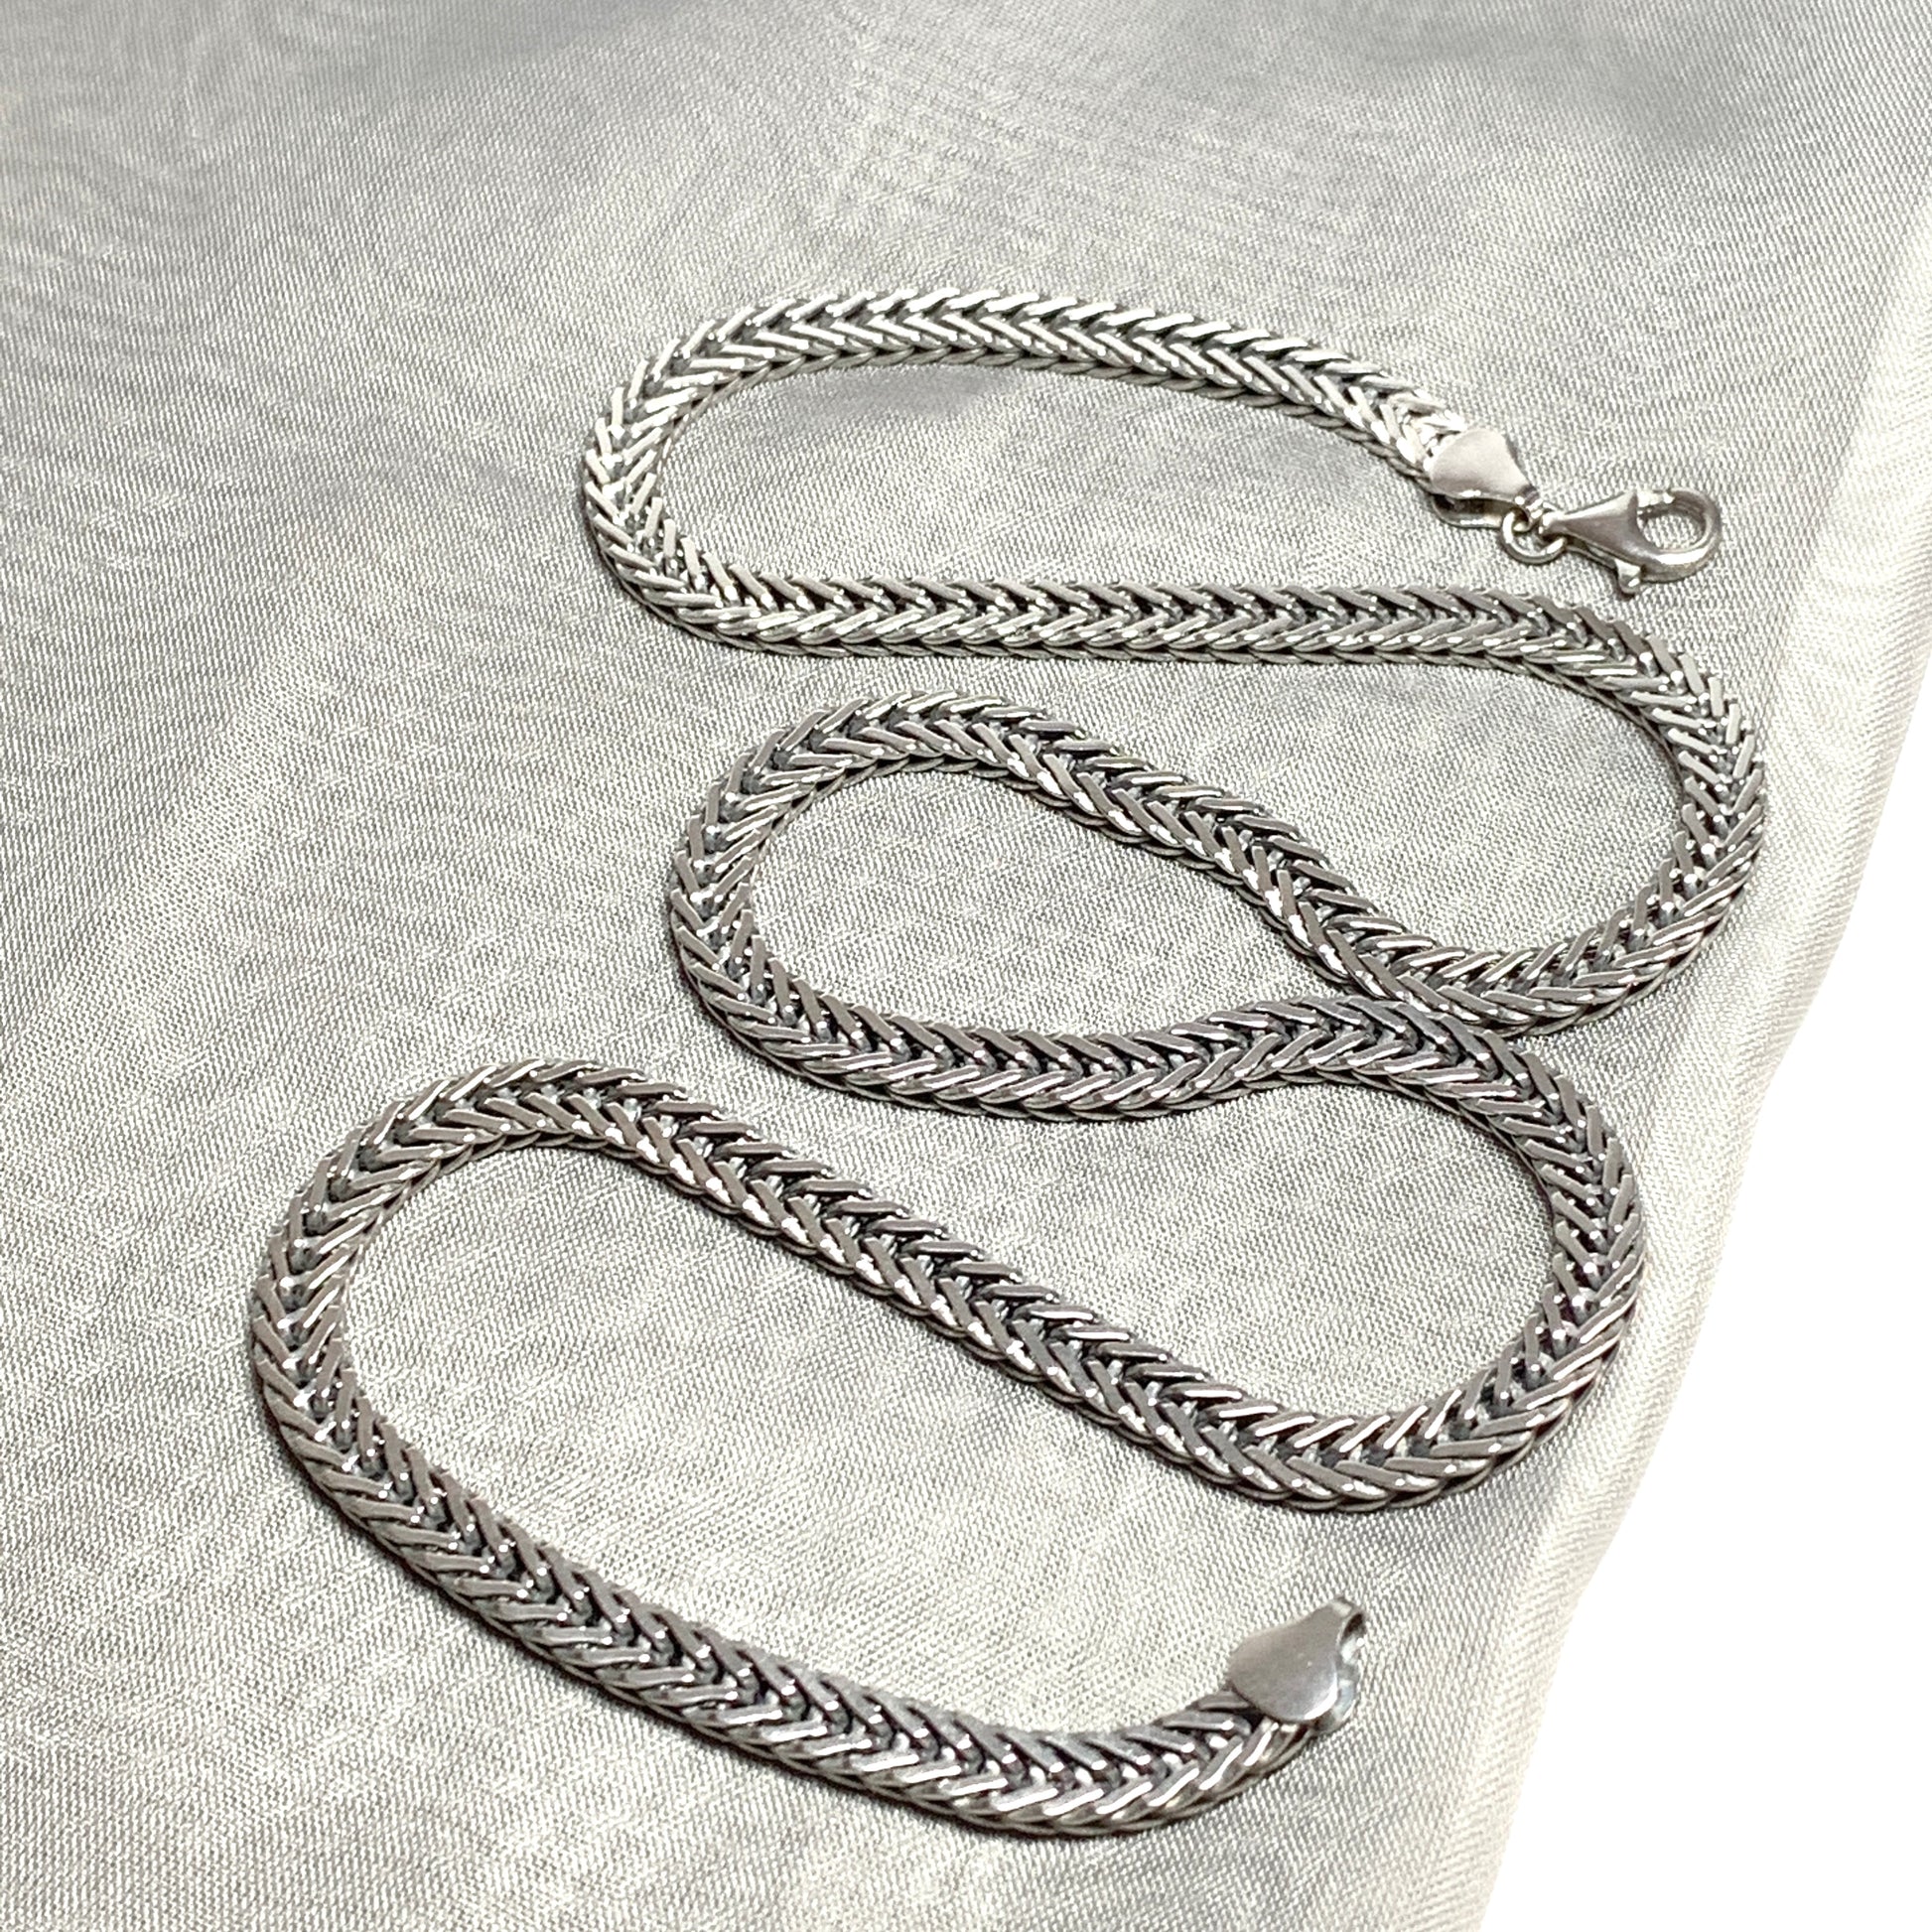 Men's sterling silver flat Spiga necklace chain 22 inches